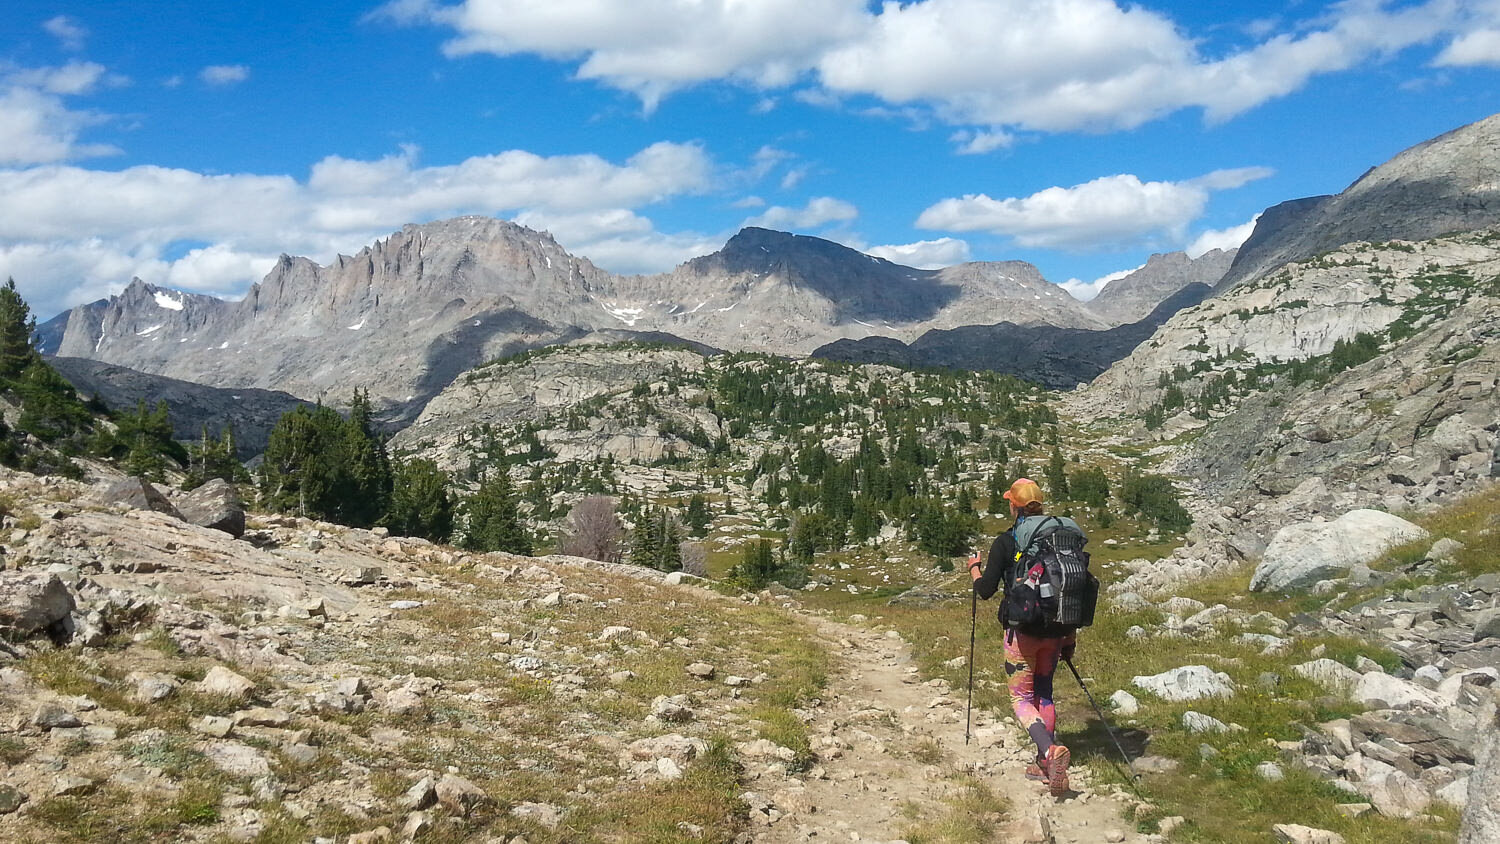 A backpacker hiking in the Wind River Range in Wyoming with distant mountains in the background